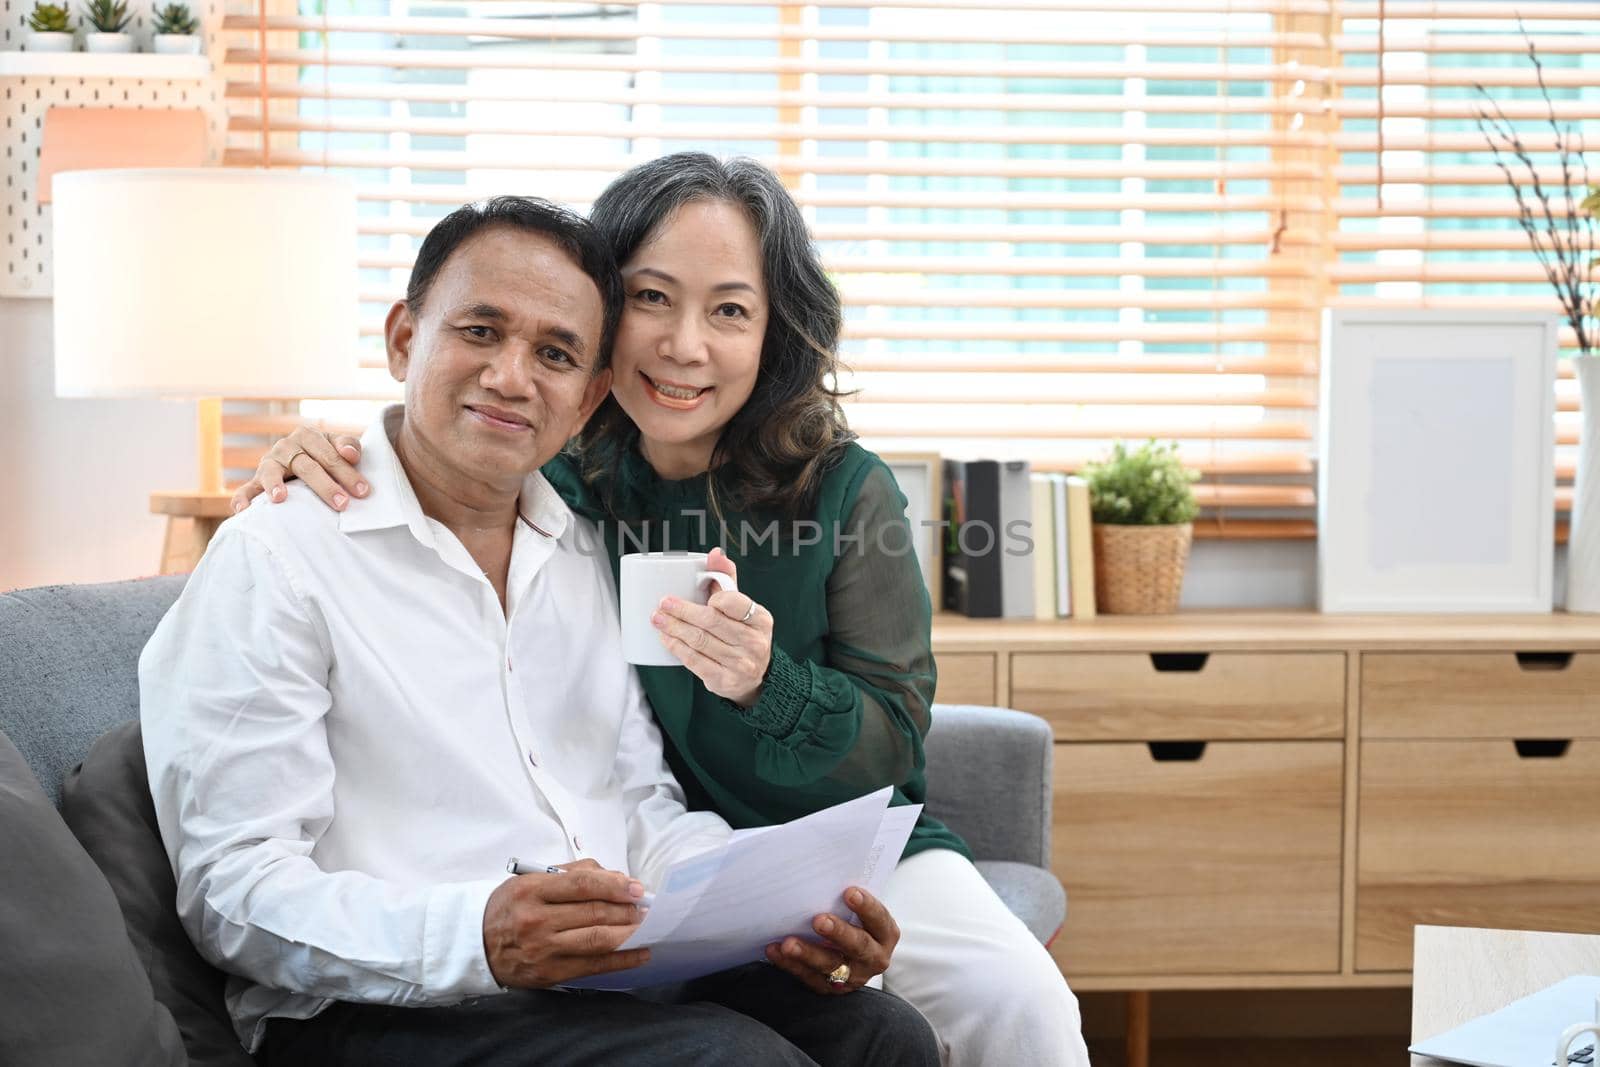 Happy senior couple relaxing together on comfortable sofa at home. Retirement lifestyle concept by prathanchorruangsak